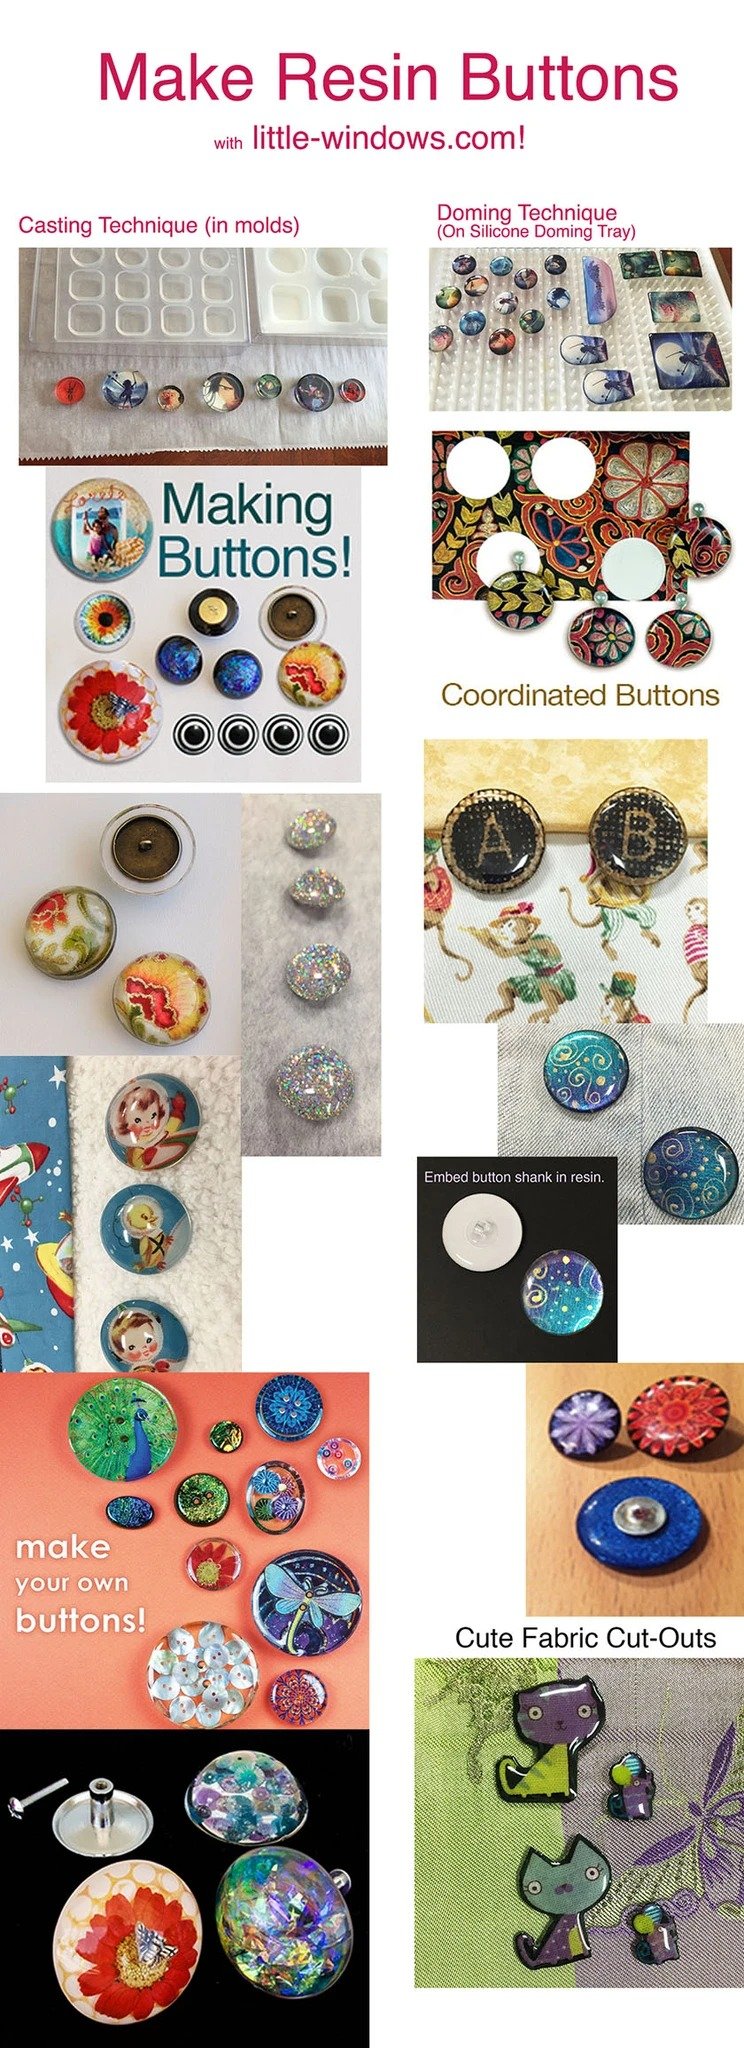 make resin buttons sewing casting doming embellish